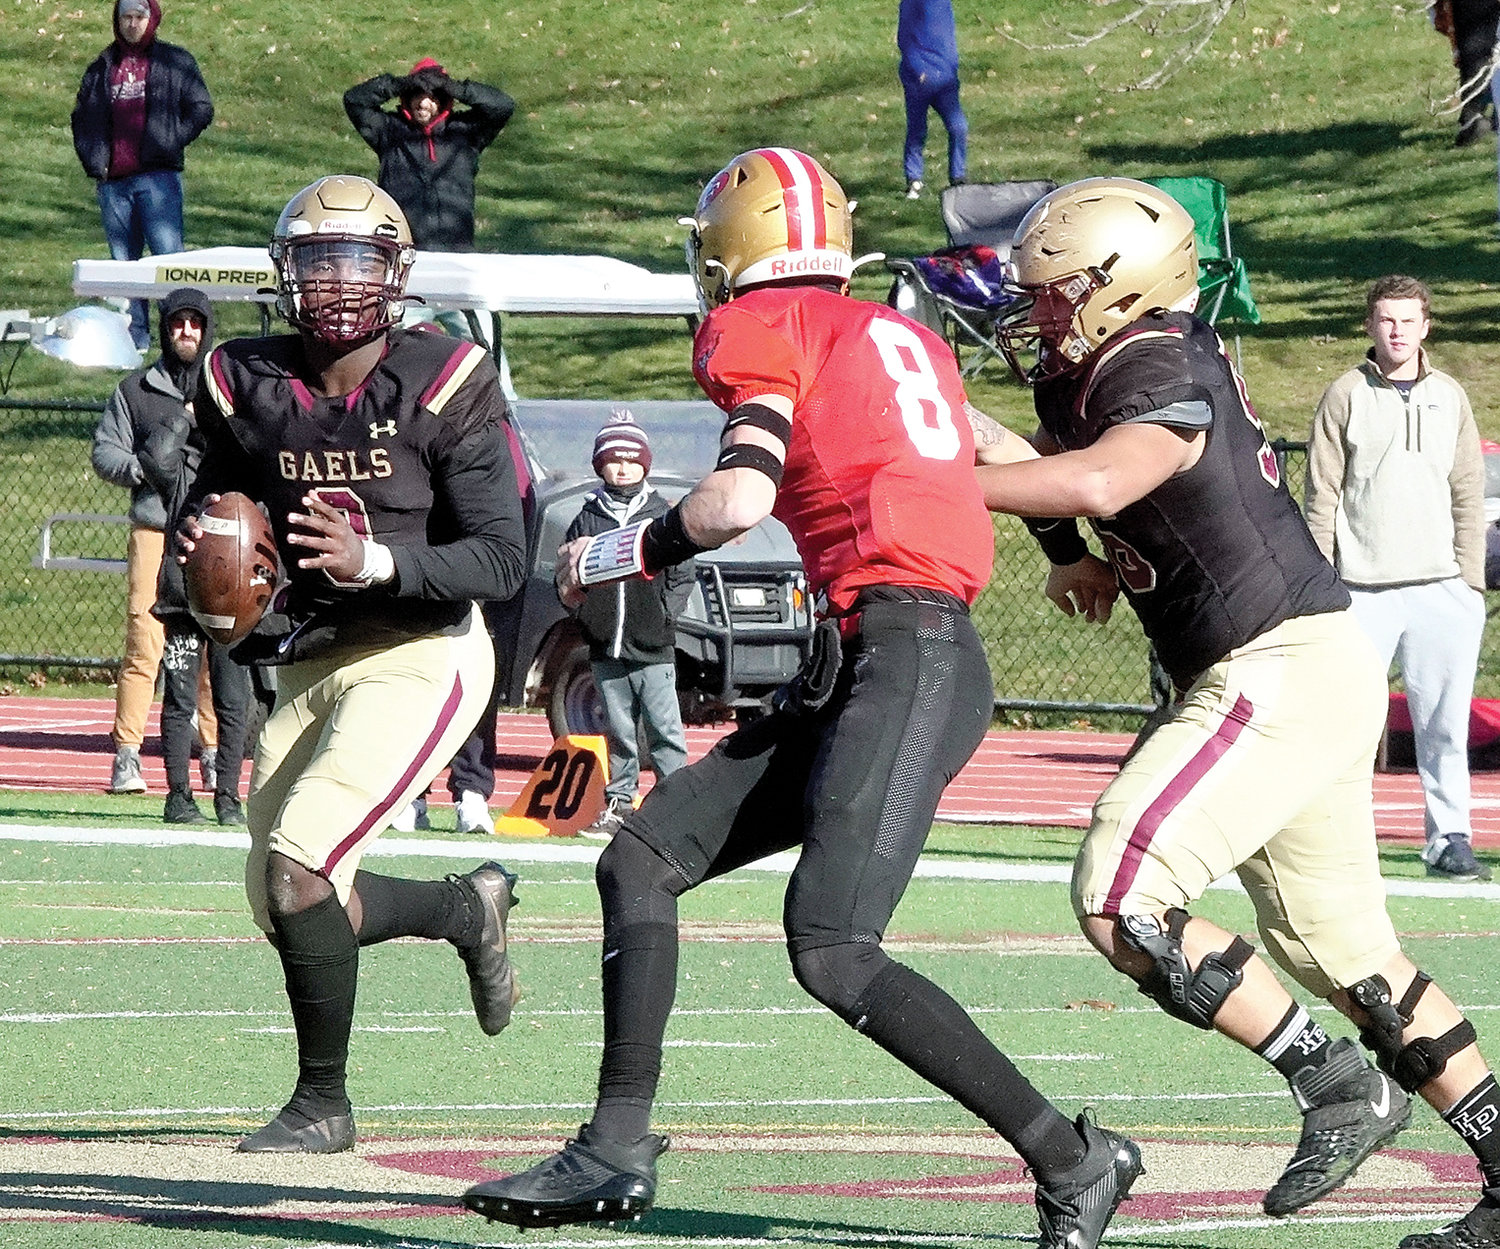 Iona Prep quarterback Ajani Sheppard looks to pass in the game where he became the first player in Westchester County history to surpass 2,000 passing yards and 1,000 rushing yards in a single season.